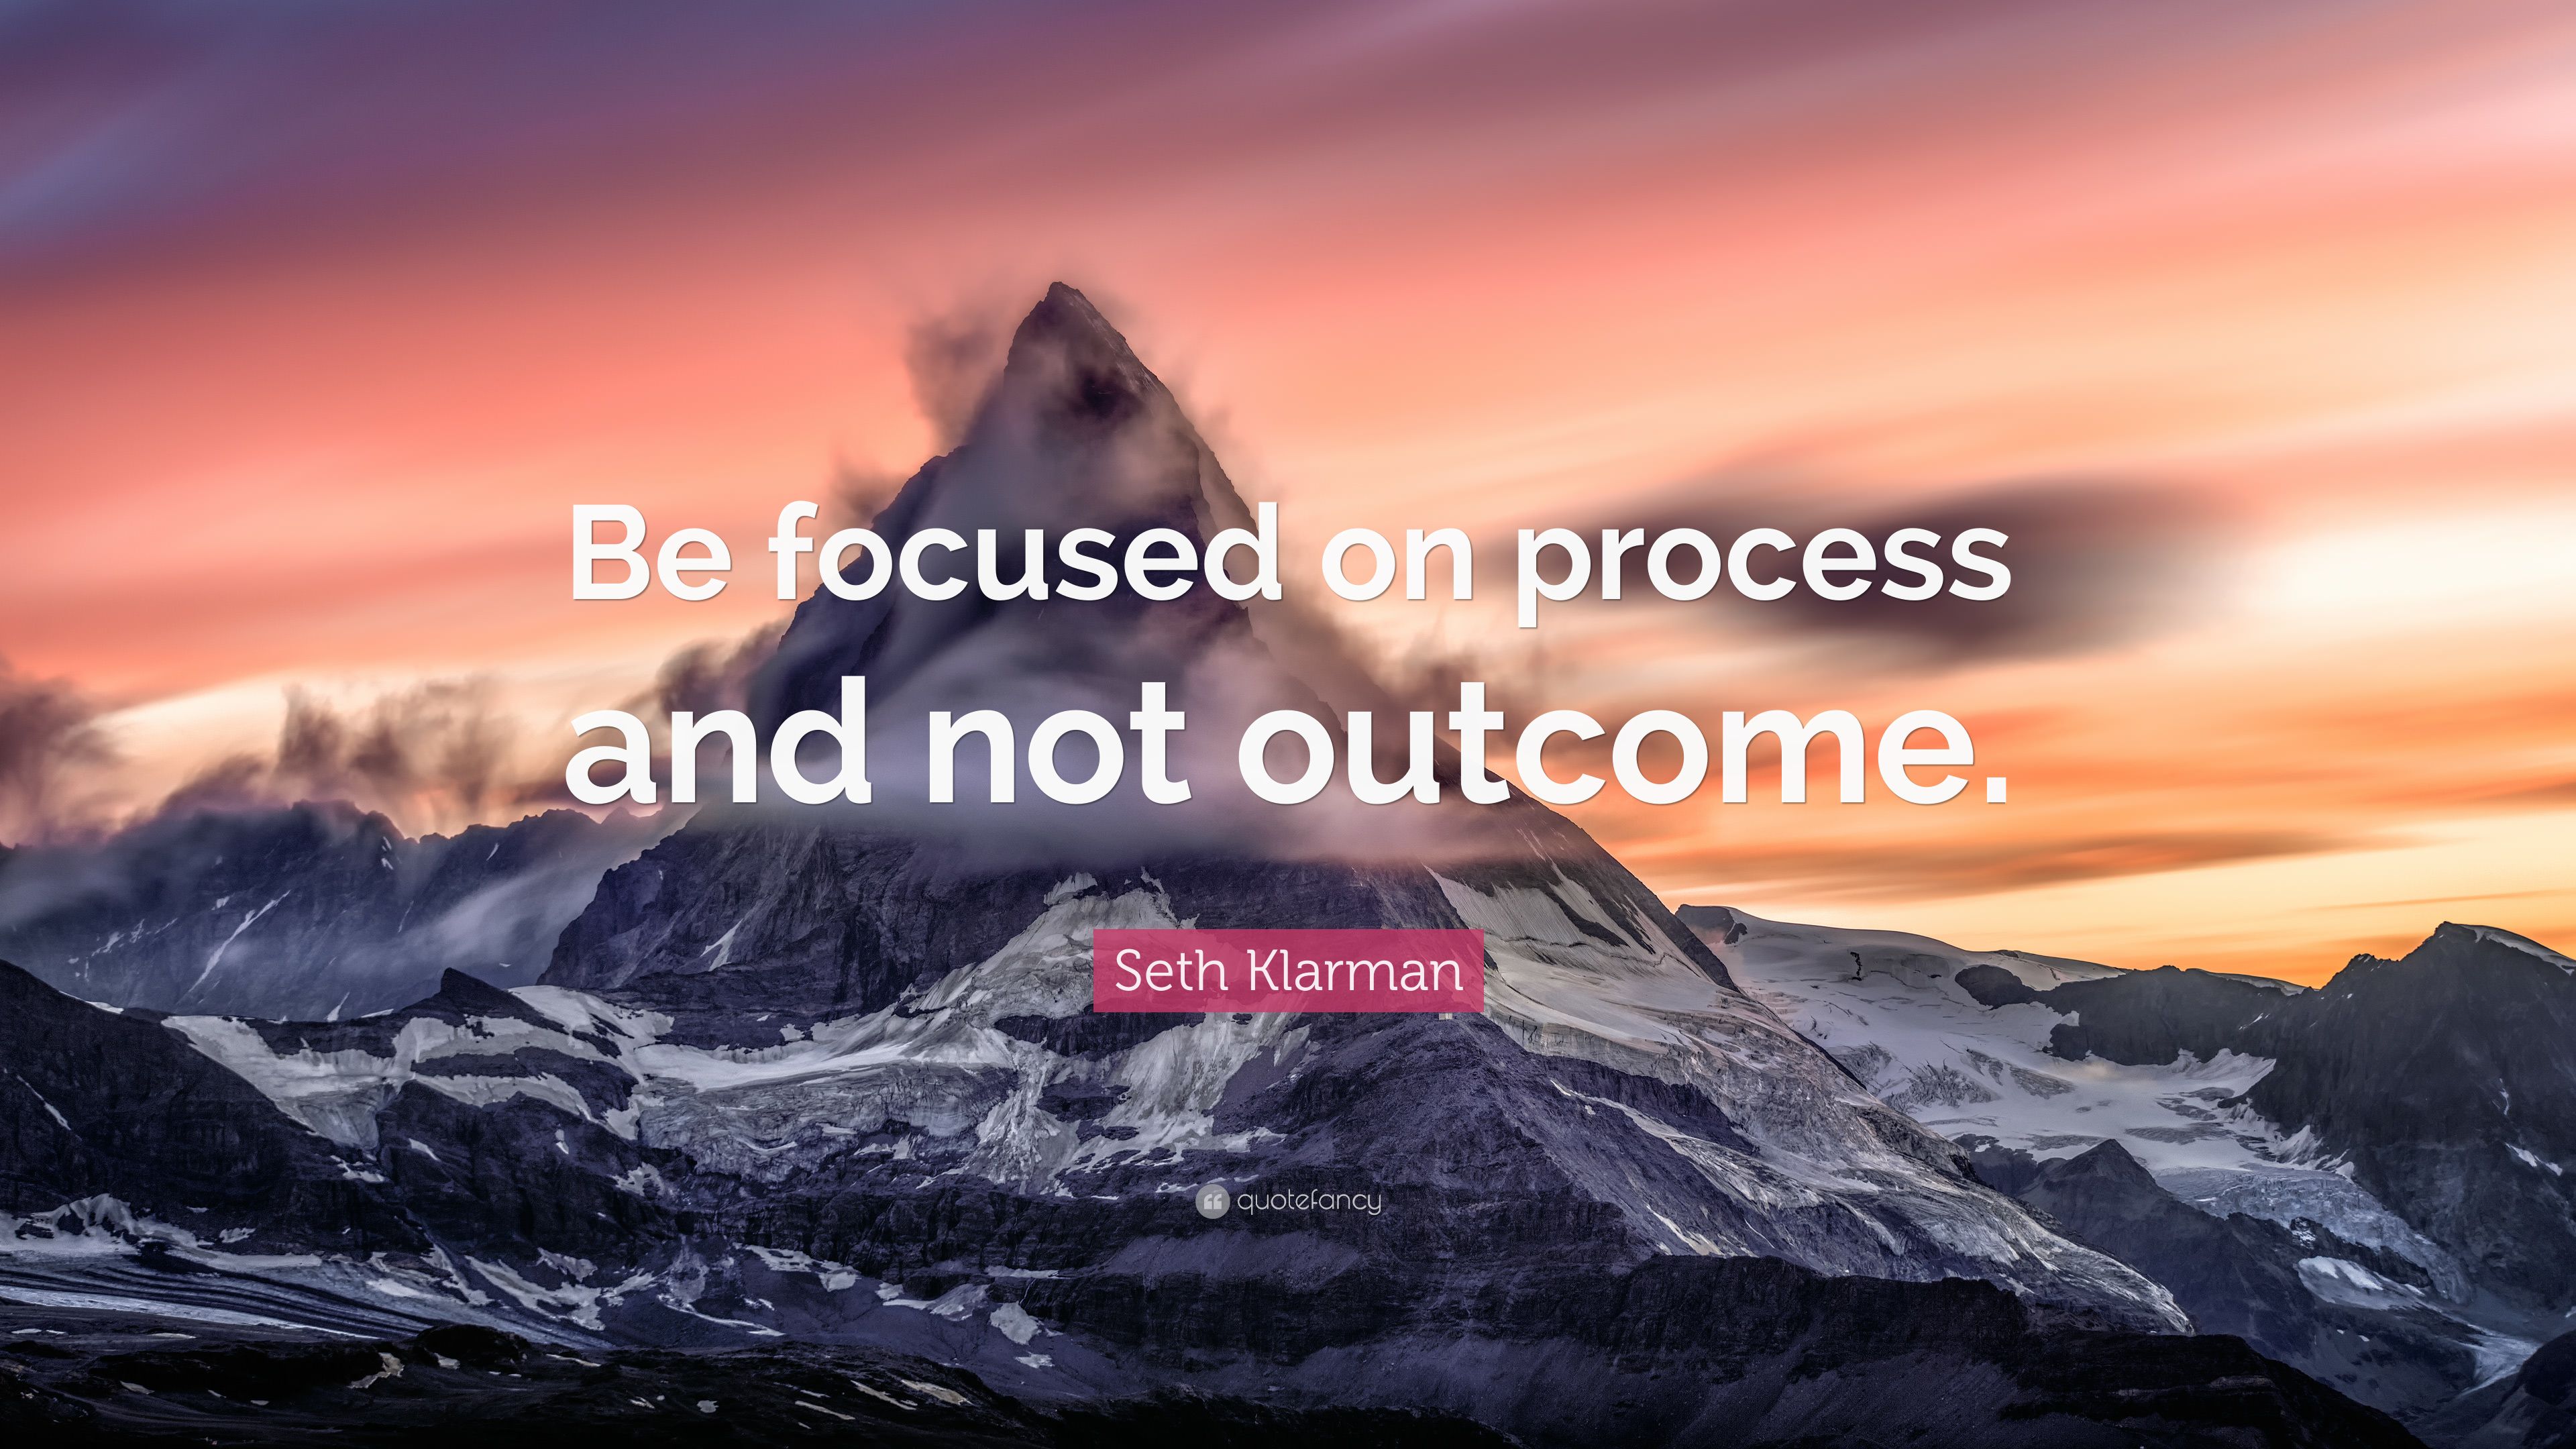 Seth Klarman Quote: “Be focused on process and not outcome.” (7 wallpaper)